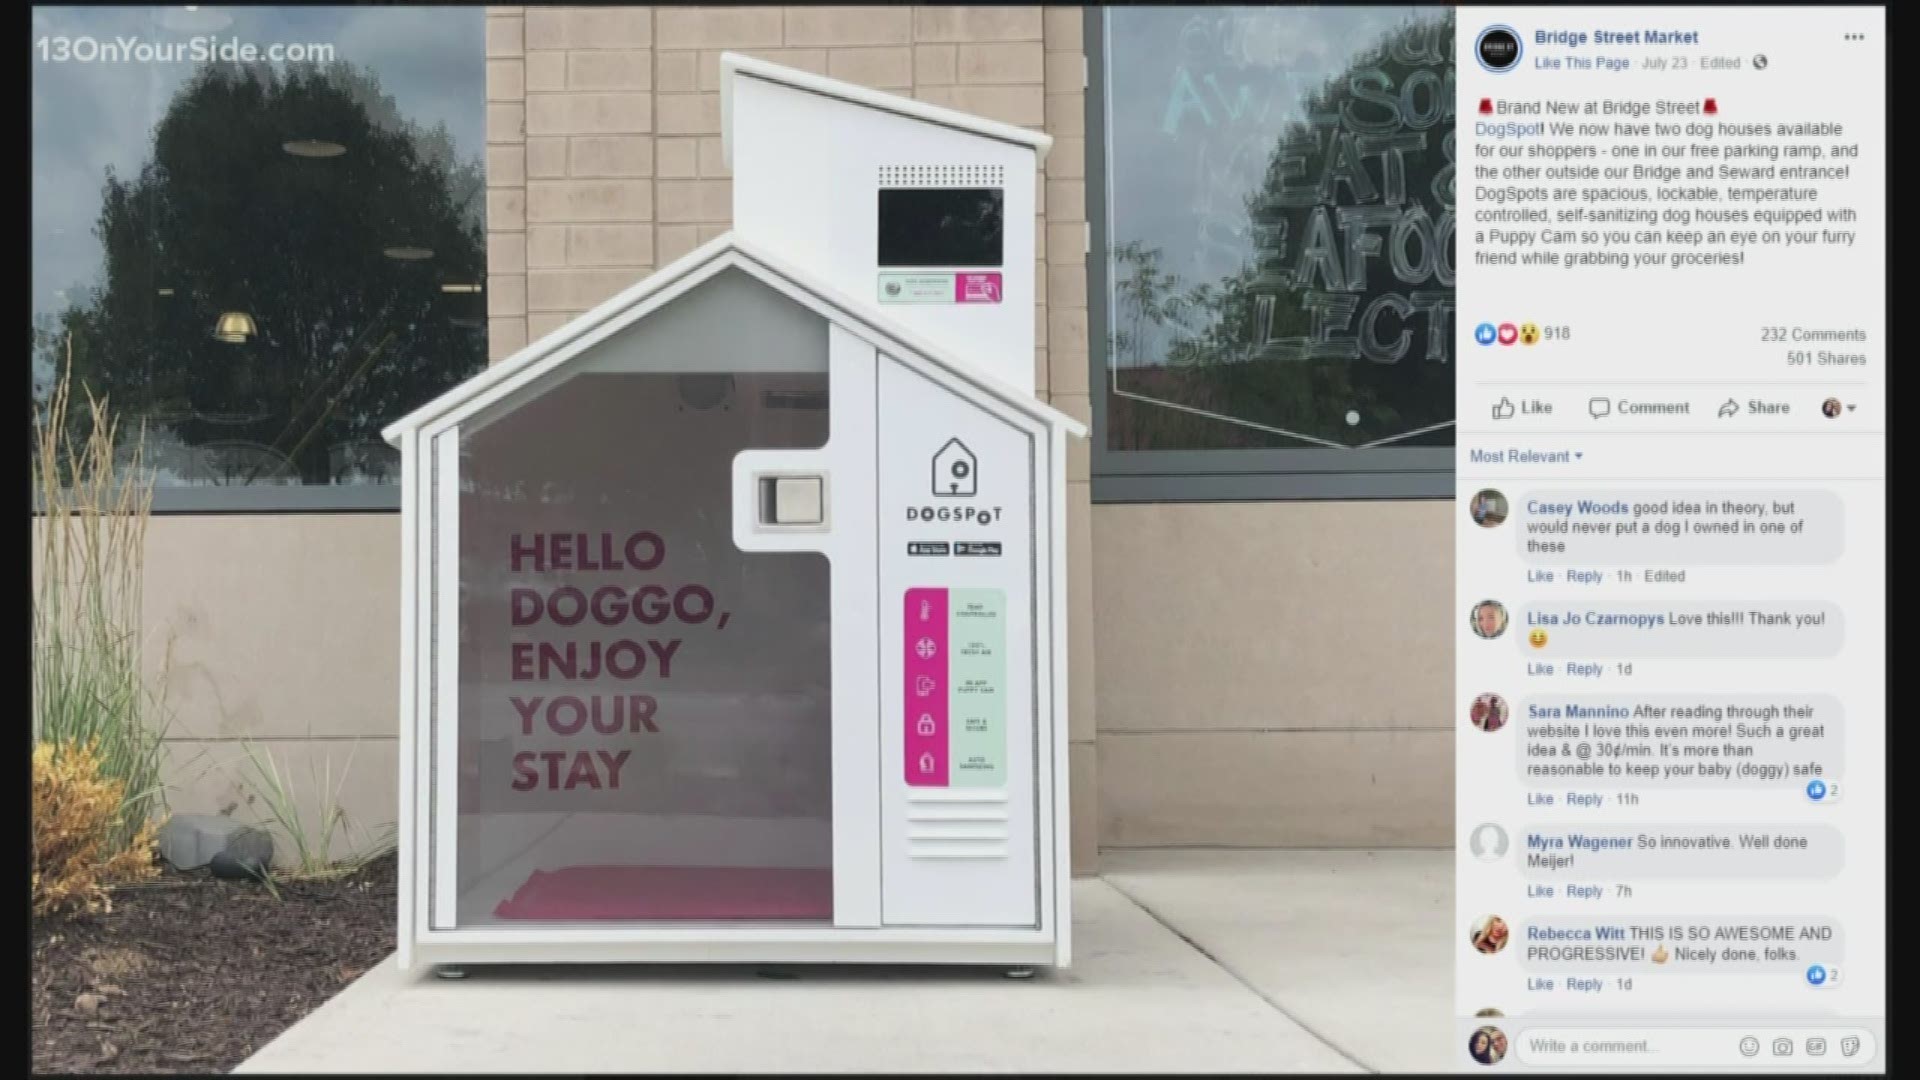 The Bridge Street Market just got a little more pet-friendly. The houses, created by a company named DogSpot, are spacious, lockable, temperature-controlled and self-sanitizing structures equipped with cameras so shoppers can go about their business insides Bridge Street, even if their four-legged friend is tagging along.